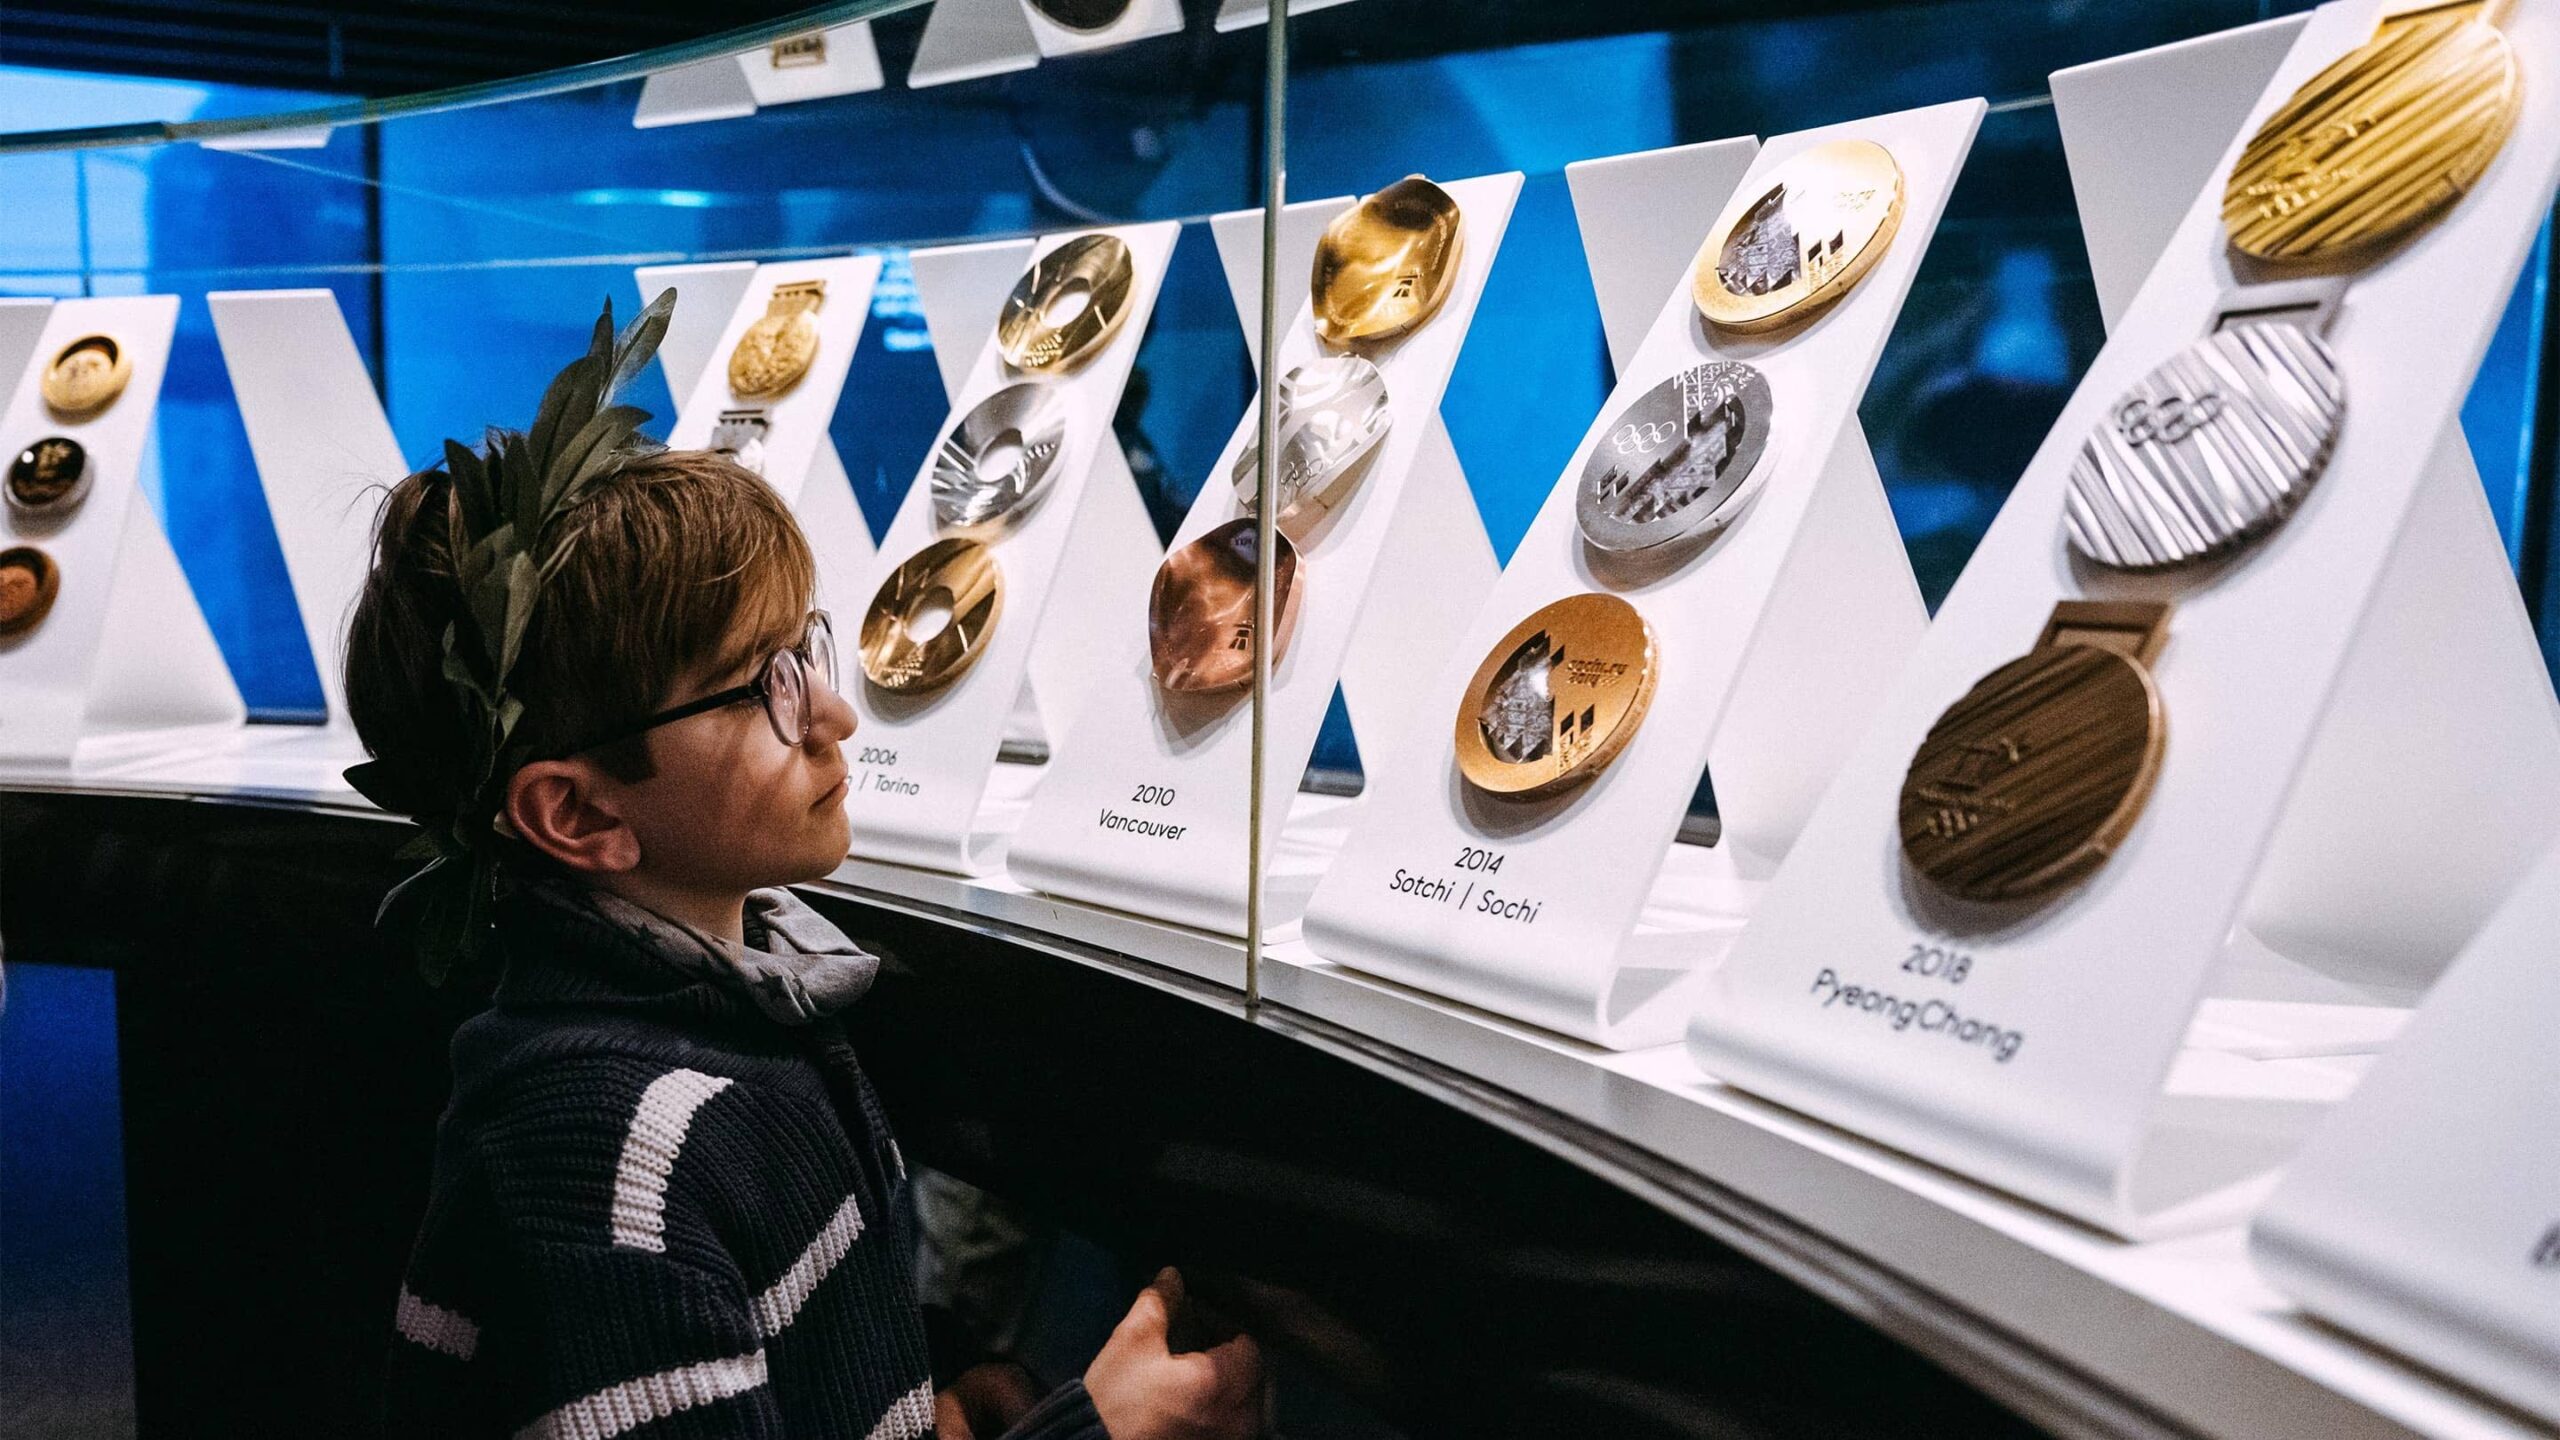 Child looks at medals in the olympic museum